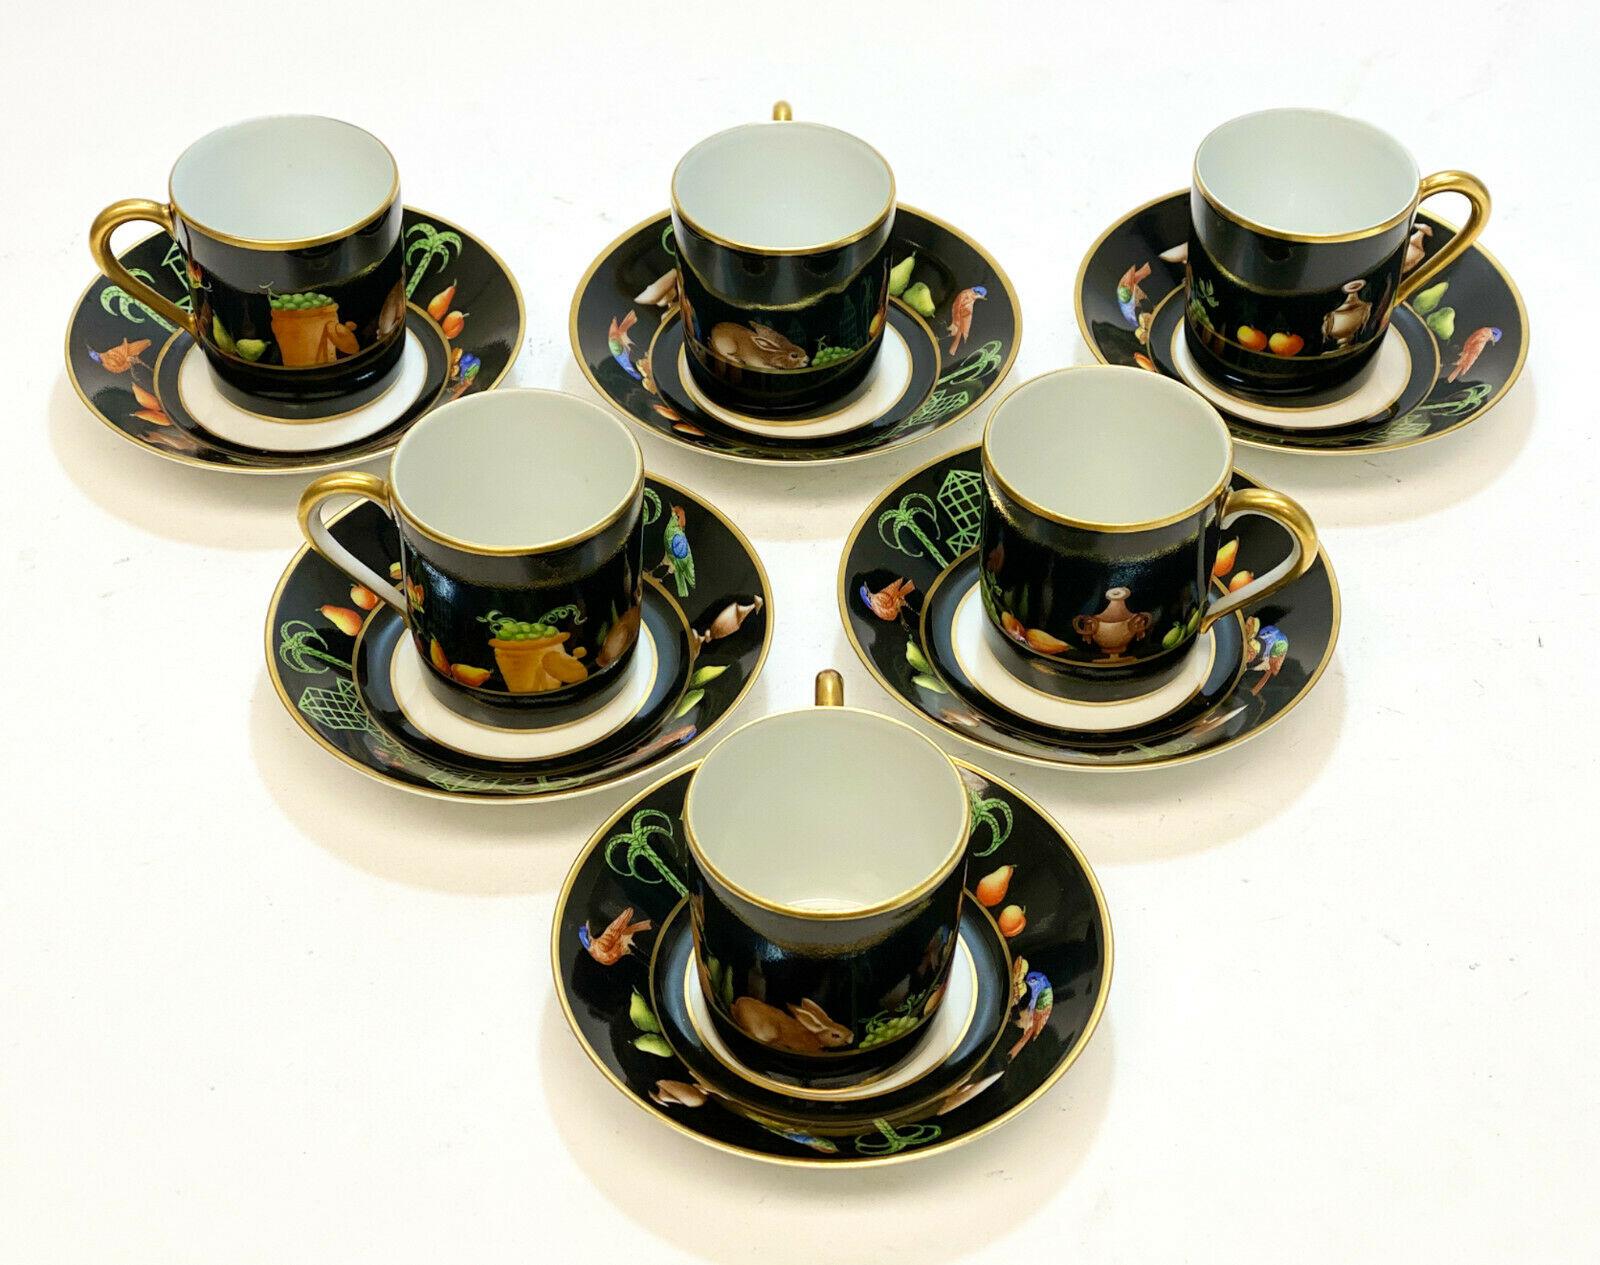 6 Tiffany Private Stock Le Tallec porcelain cup and saucers in Black Shoulder . Beautiful hand painted tropical birds, trees, fruits, and rabbits to a black and gilt ground. Tiffany Private Stock mark with the Le Tallec mark and artist initials to